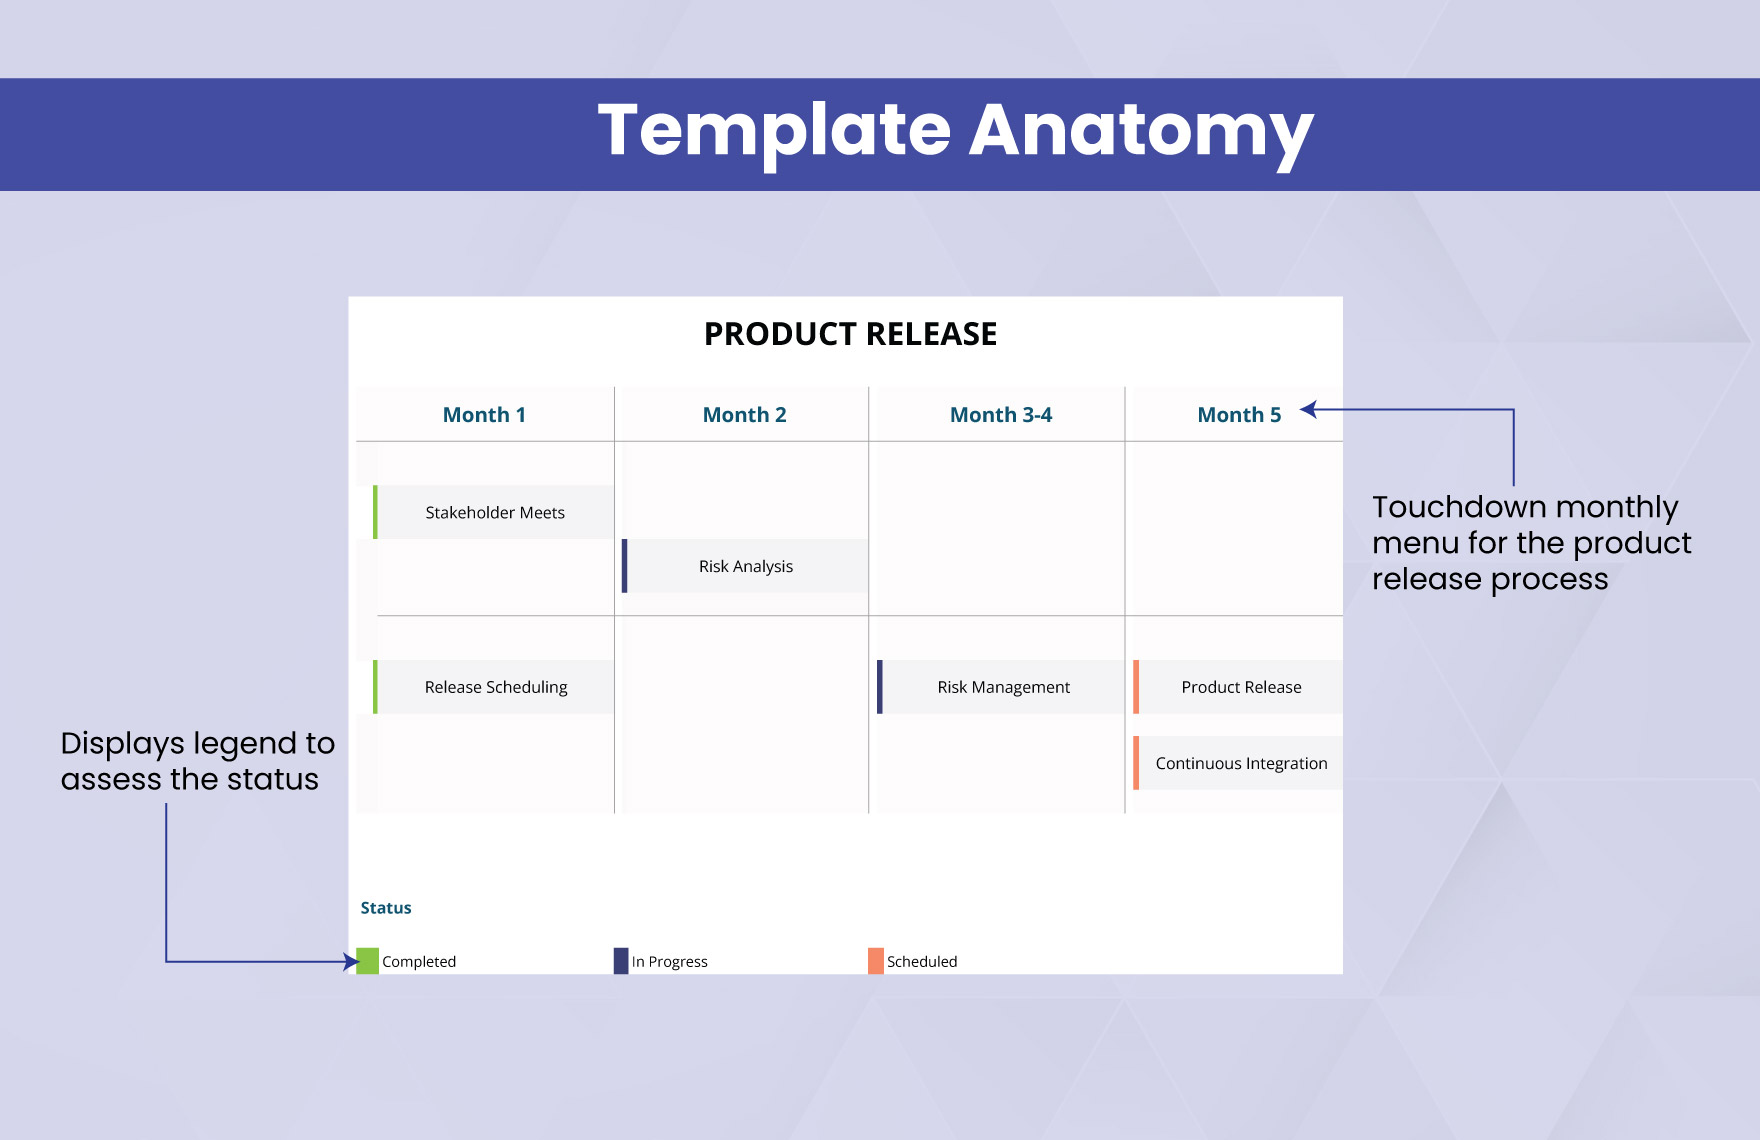 Product Release Roadmap Template